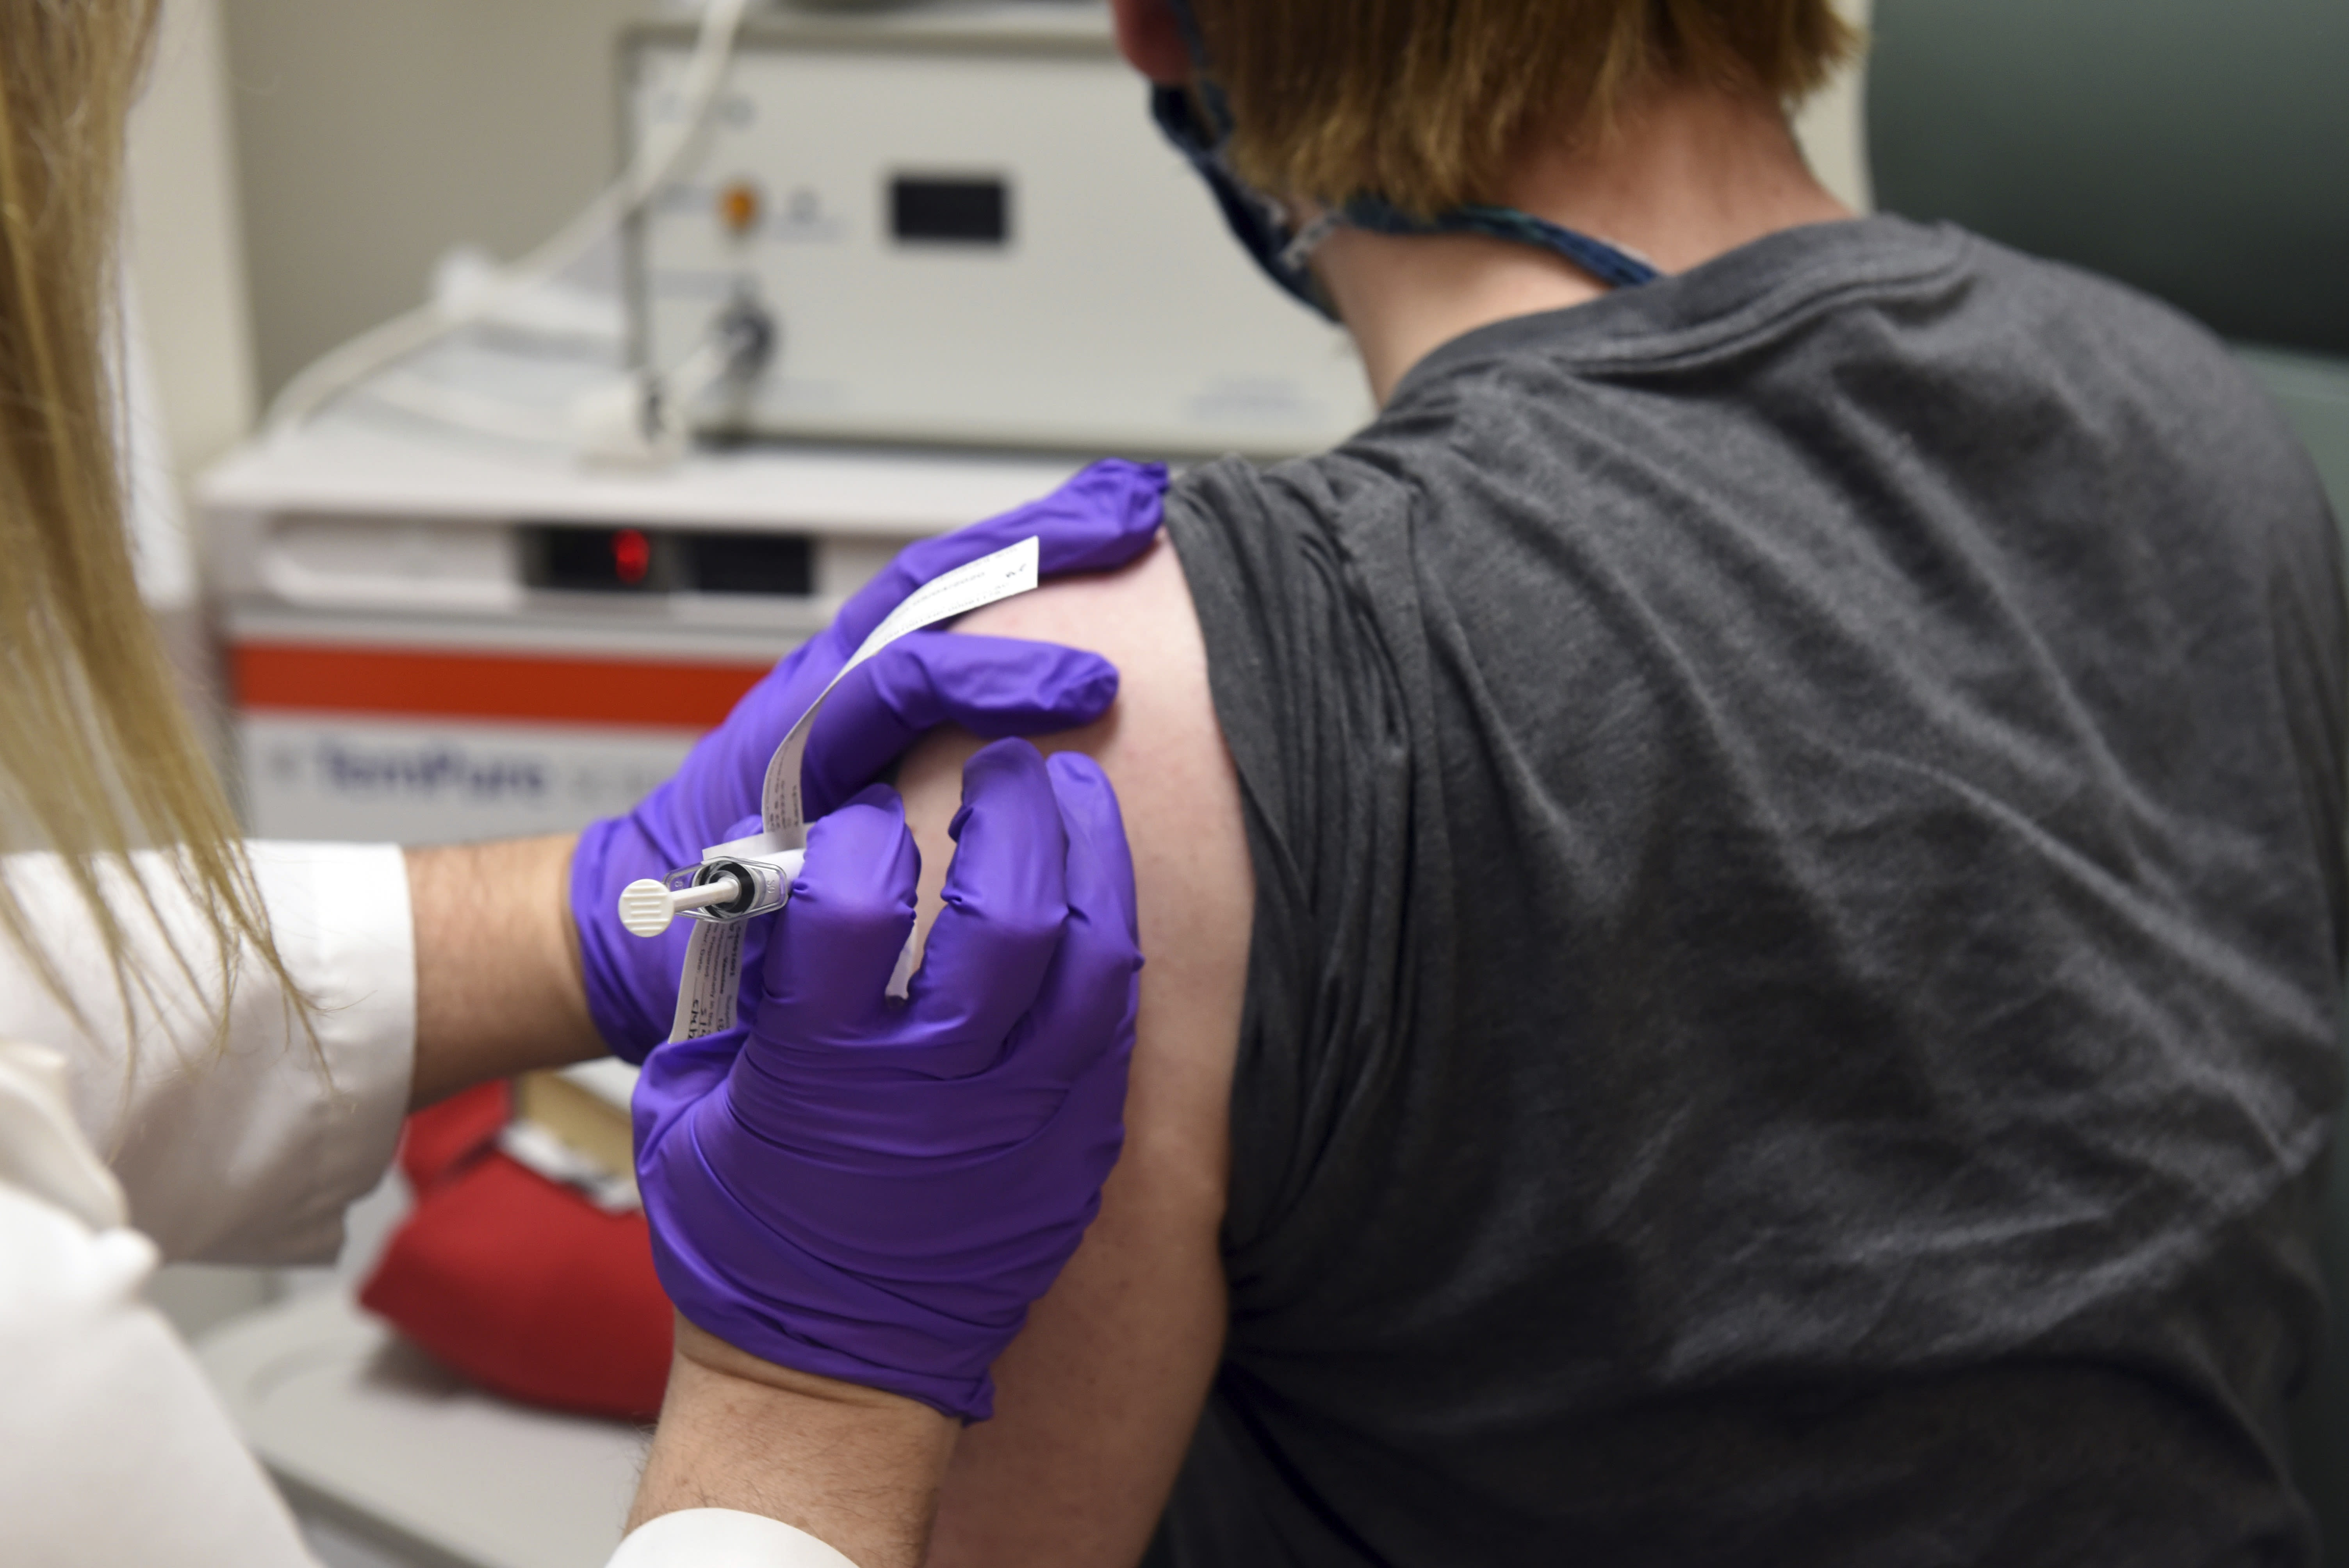 Pfizer and BioNTech began late-stage human trial for coronavirus vaccine Monday